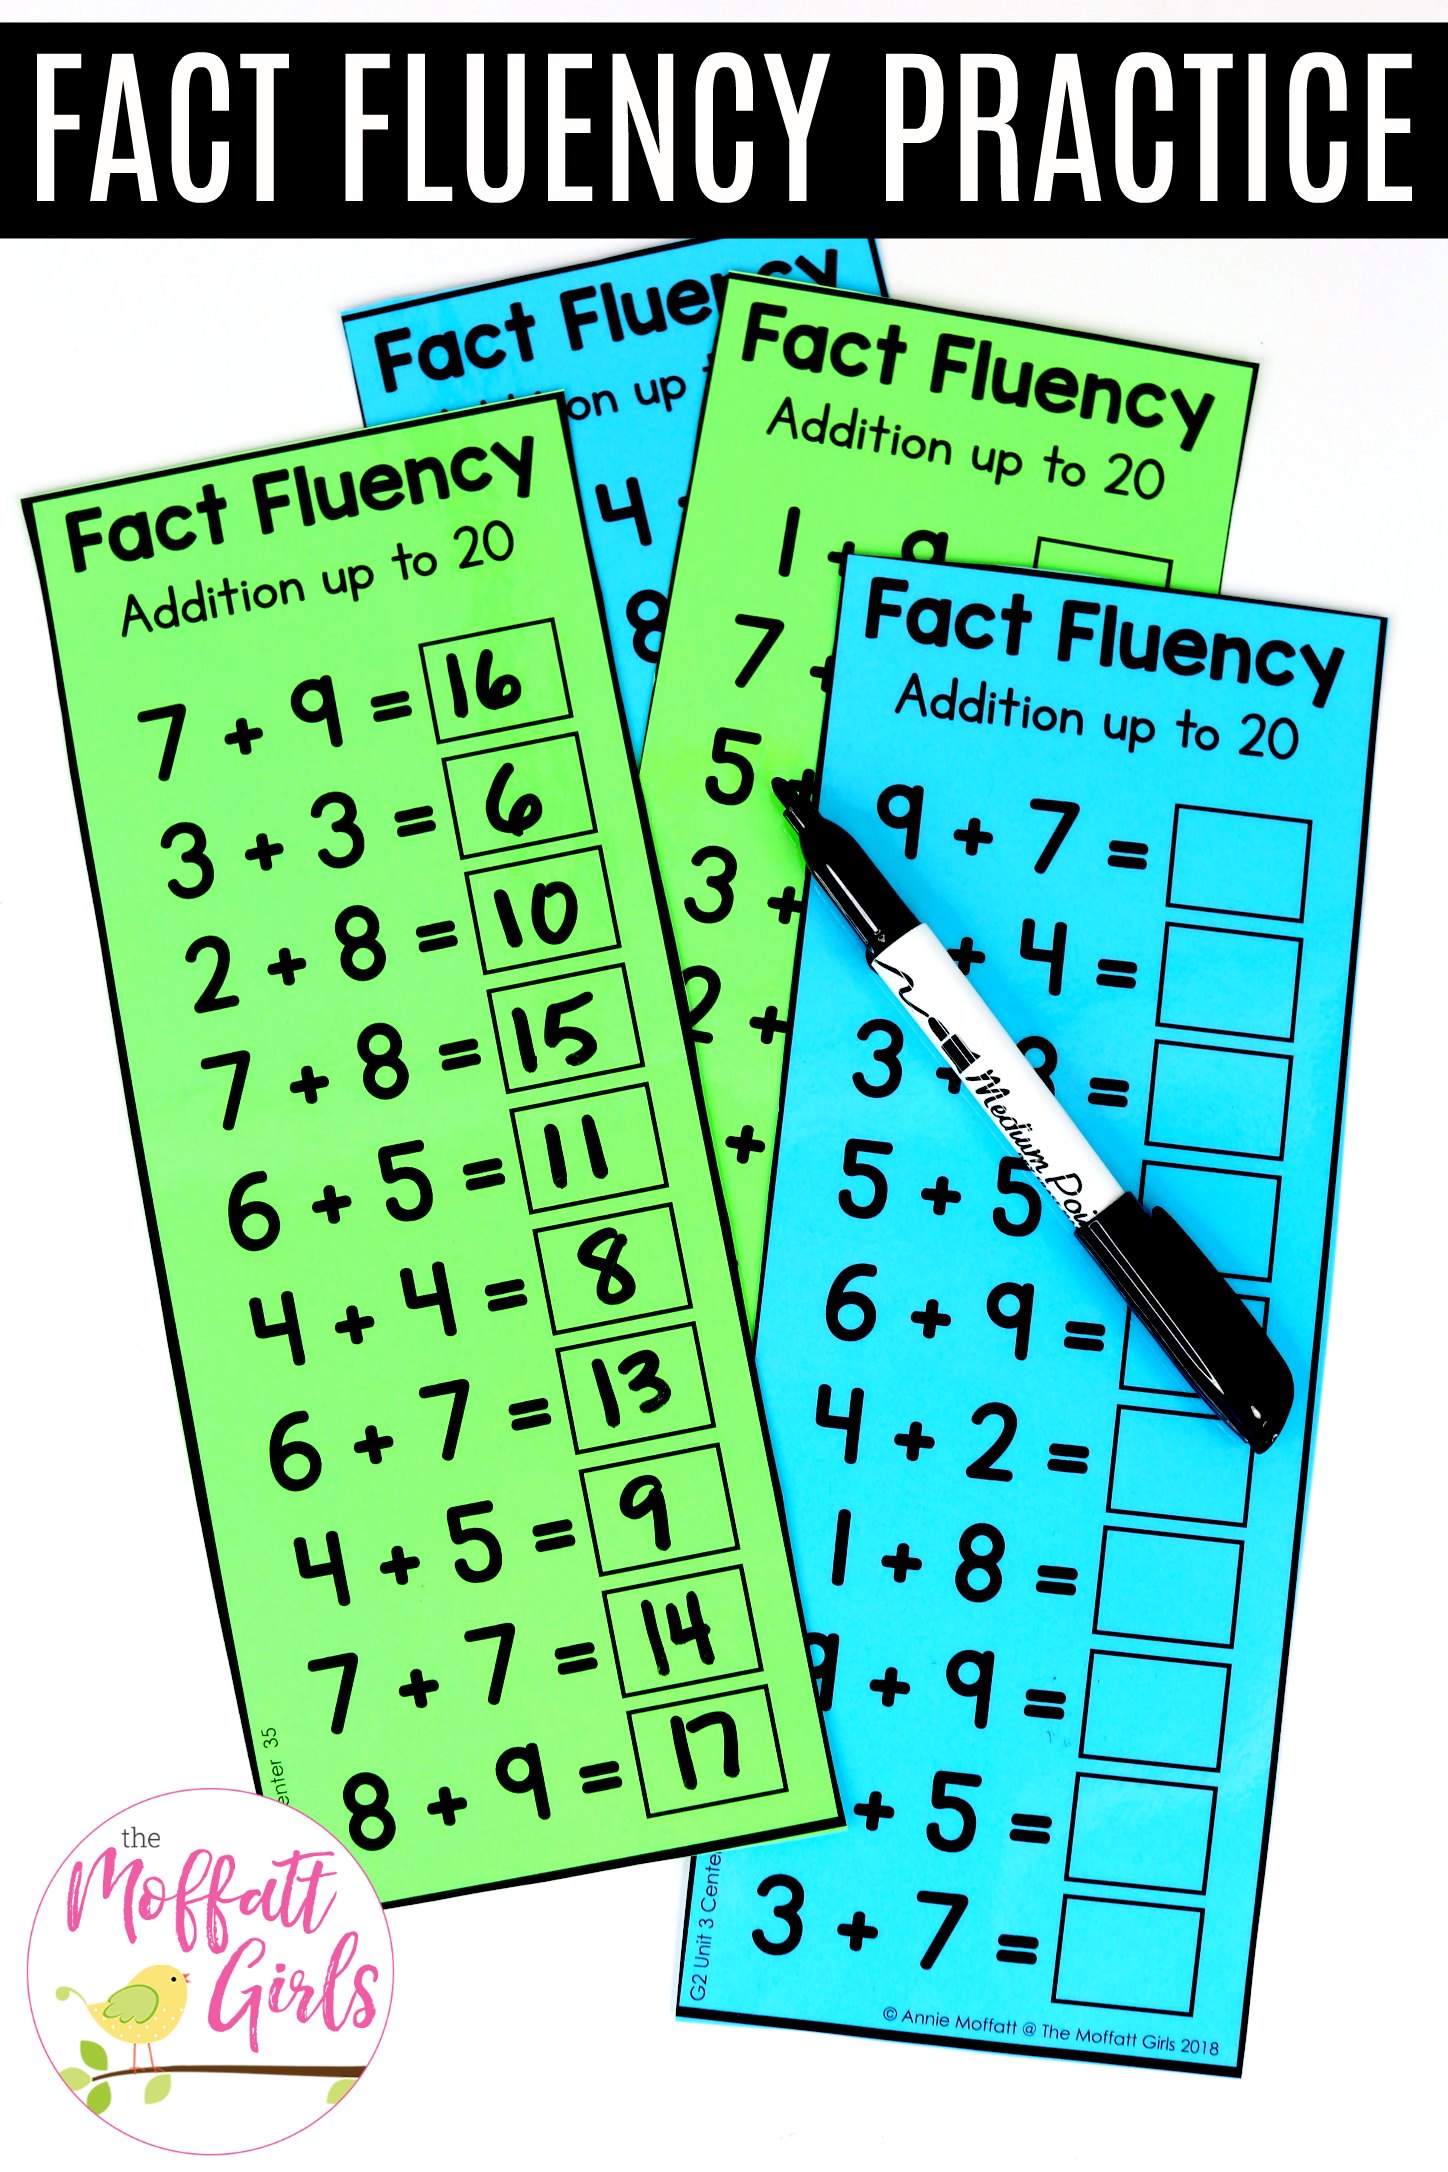 fact-fluency-addition-up-to-20-35c